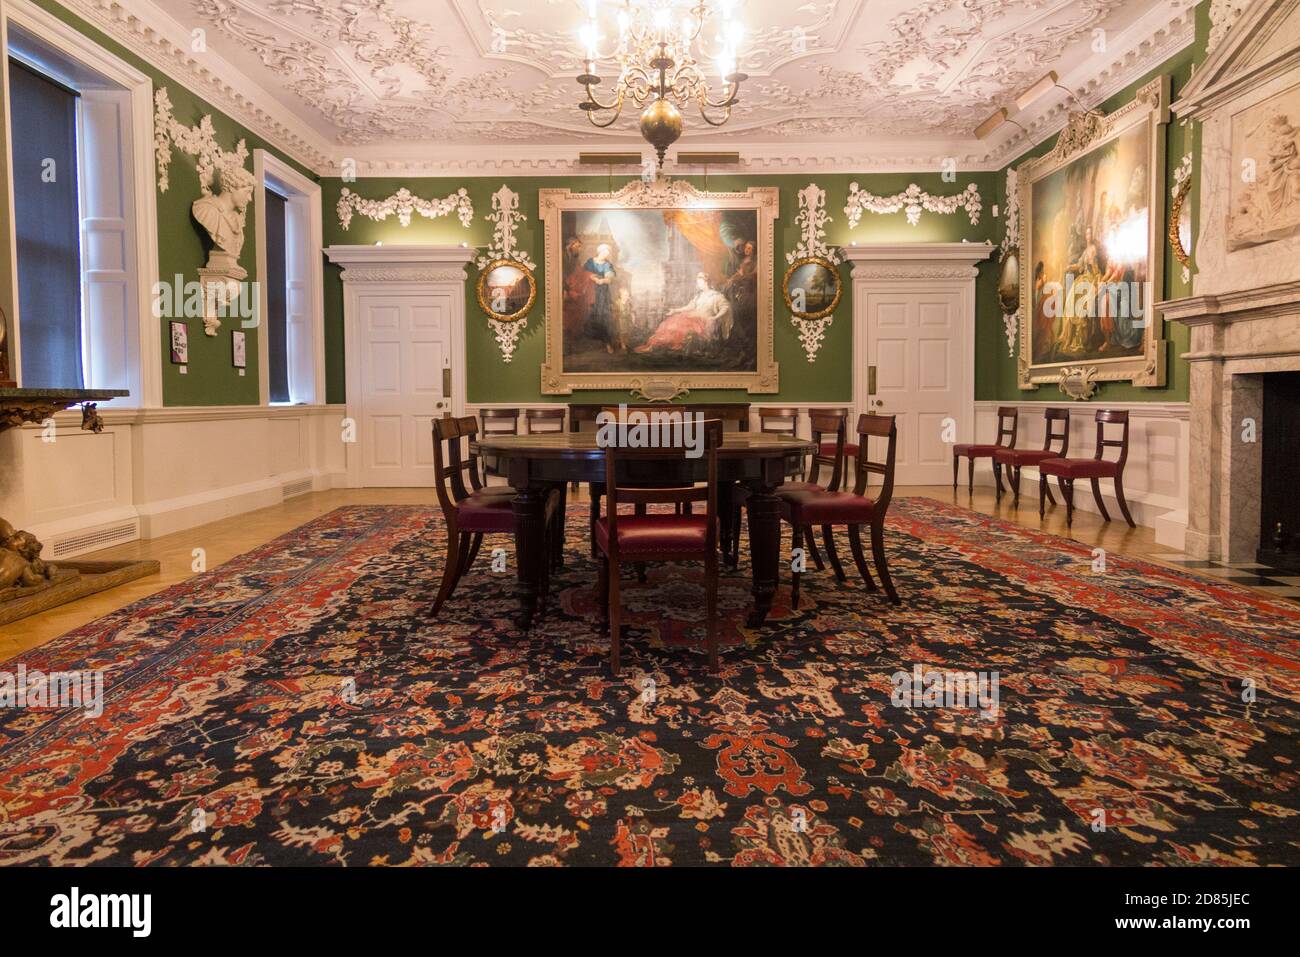 The Court Room inside the Foundling Museum, 40 Brunswick Square, Bloomsbury, London WC1N 1AZ, which tells the story of the Foundling Hospital, Britain's first home for children at risk of abandonment. UK (122) Stock Photo